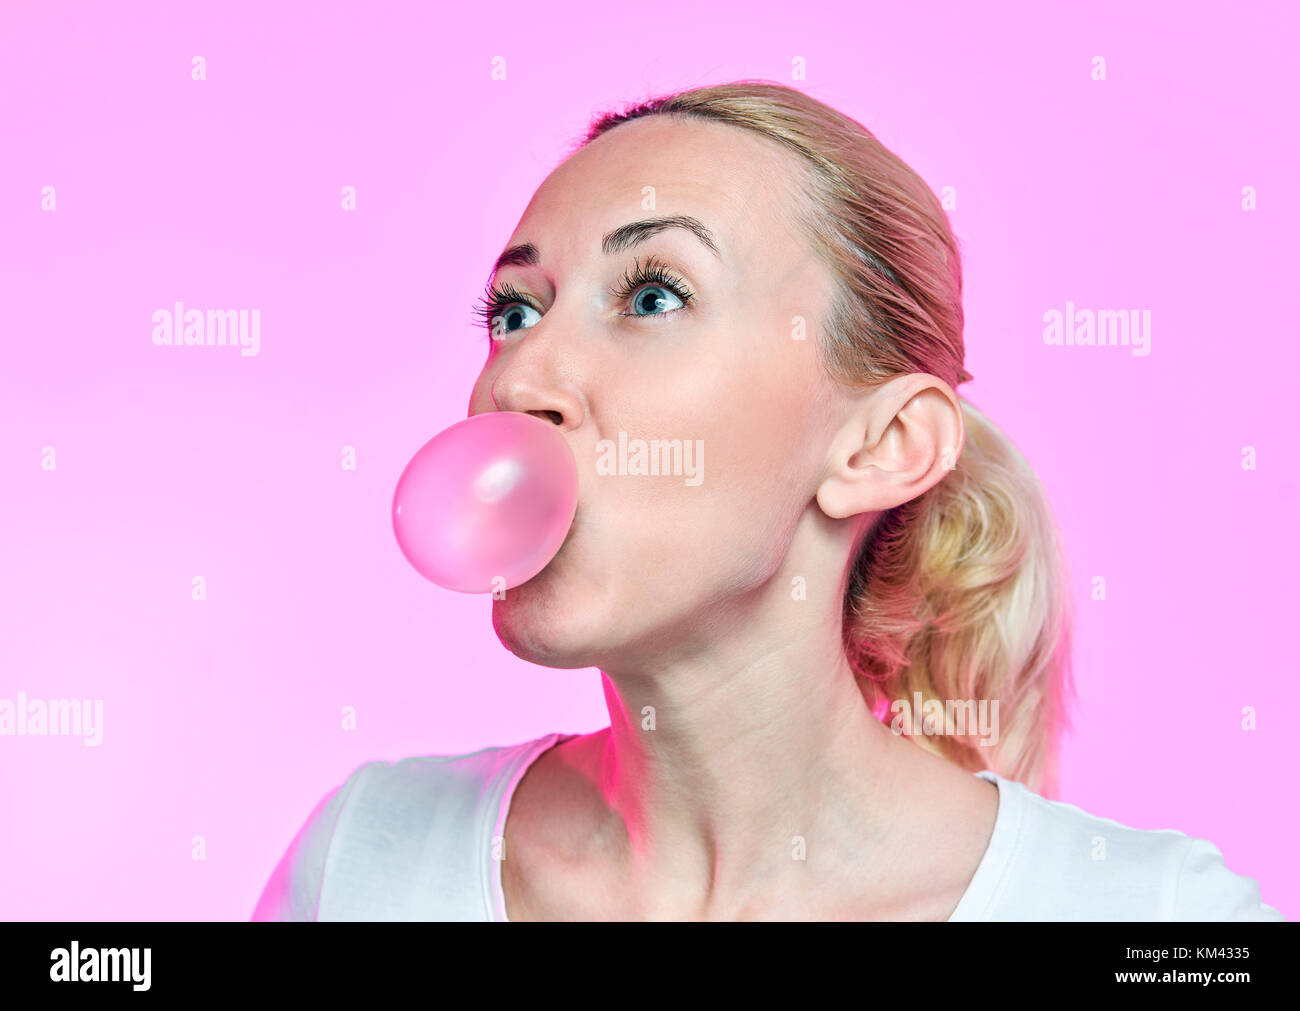 blonde girl inflates a bubble gum on a pink background Stock Photo